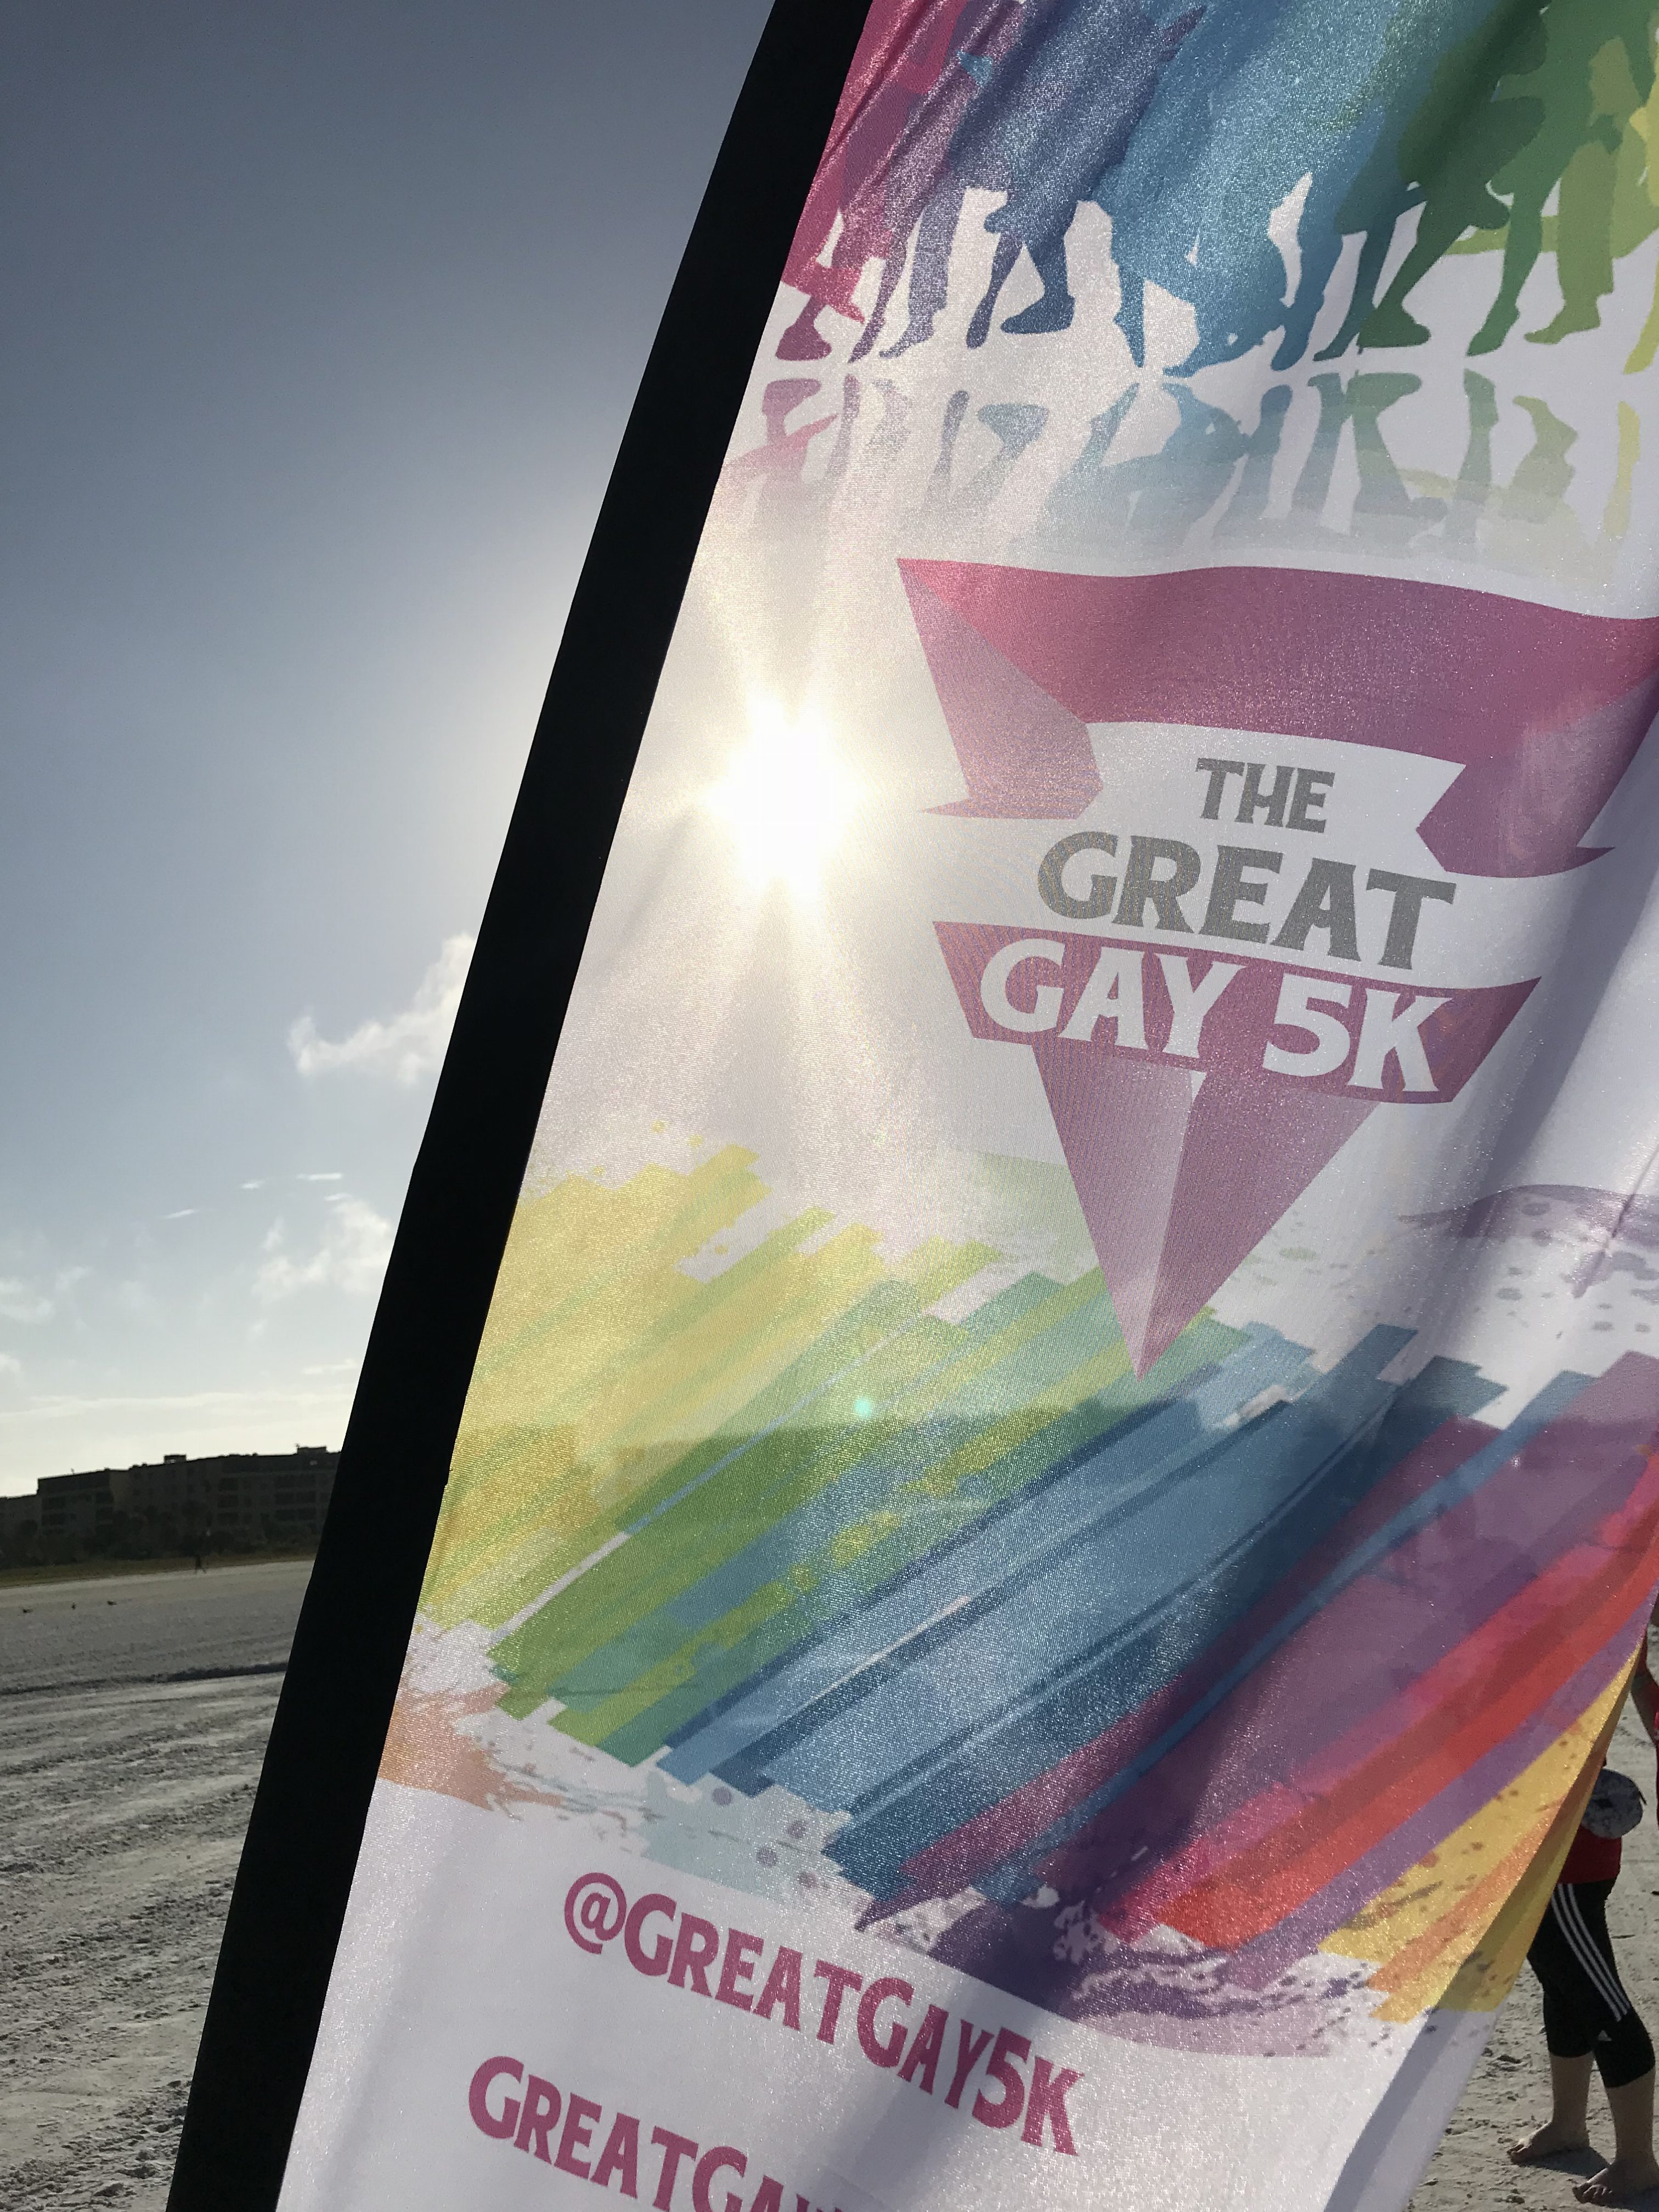 THE GREAT GAY 5K